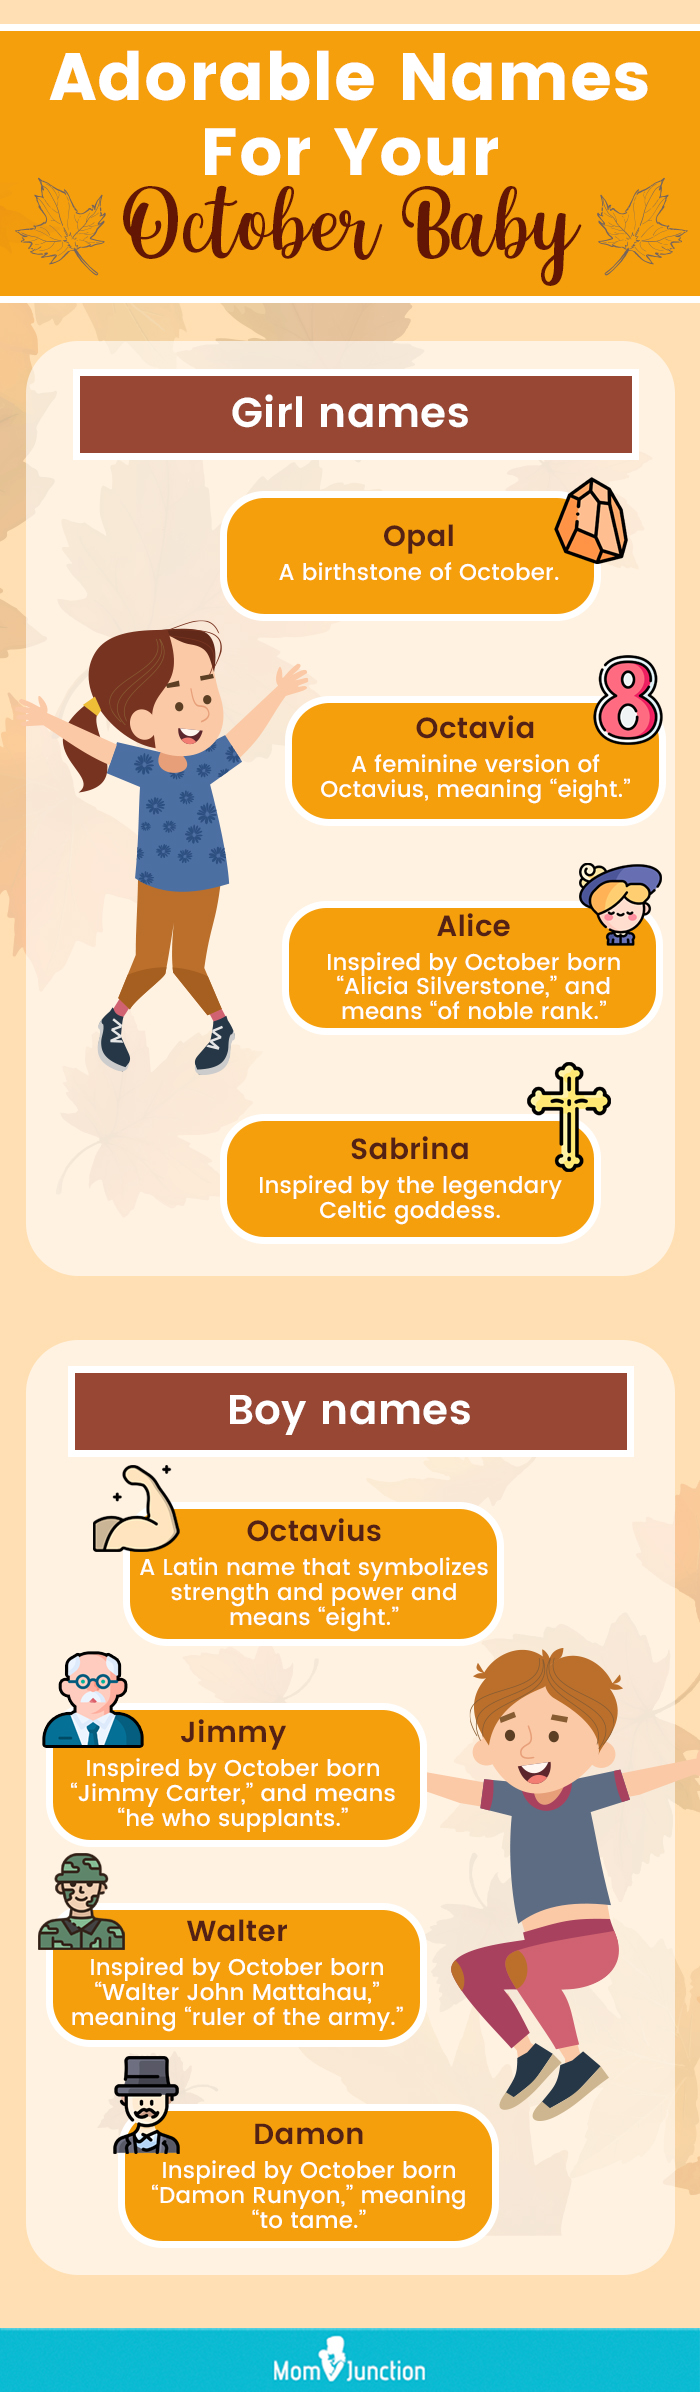 adorable names for your october baby (infographic)